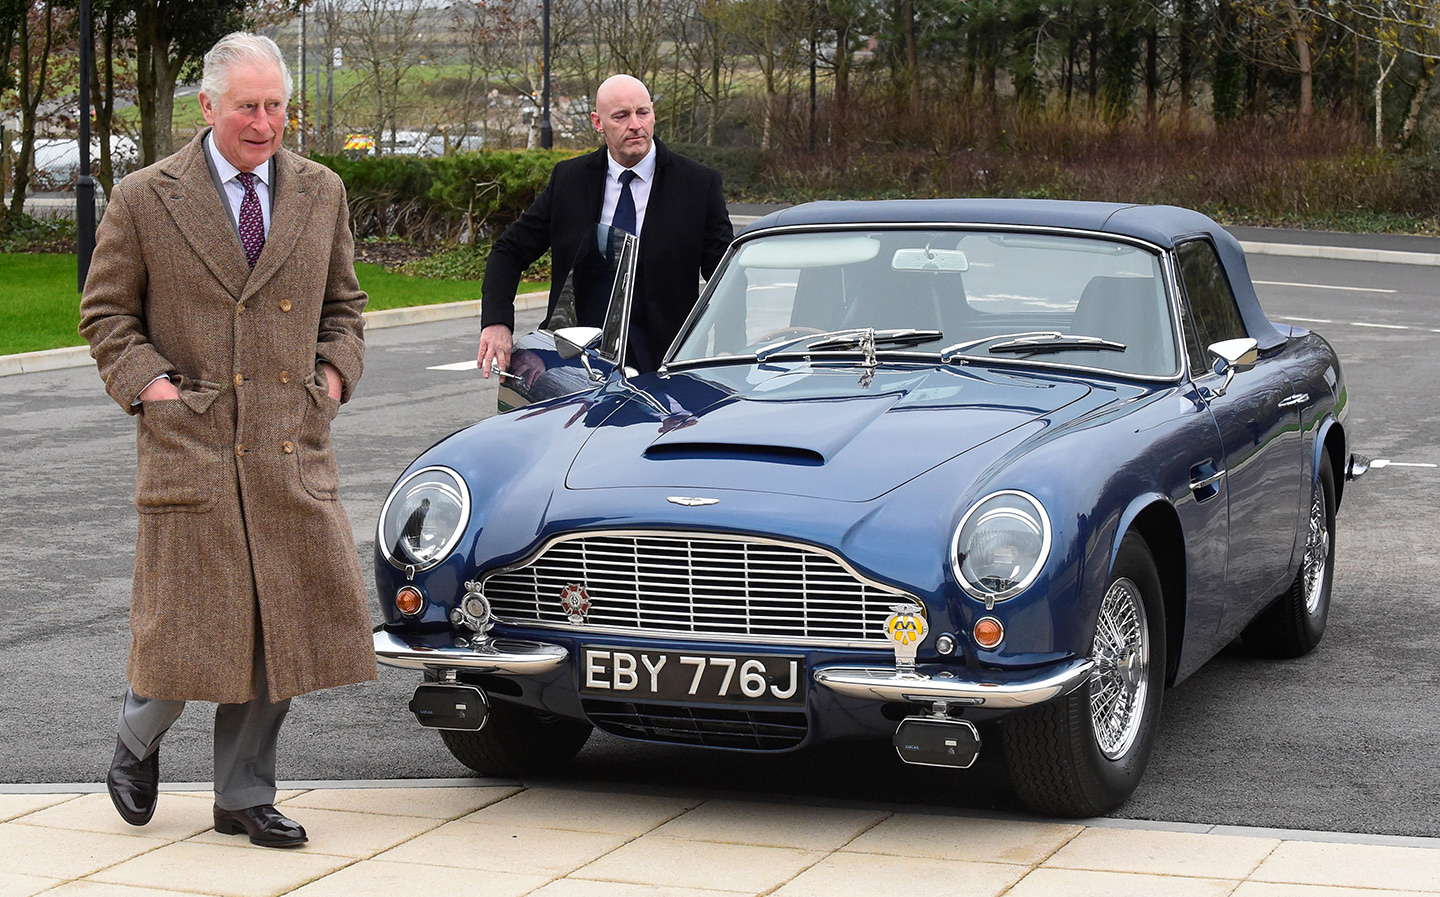 Does Prince Charles' Aston Martin DB6 really run on 'cheese and wine'?